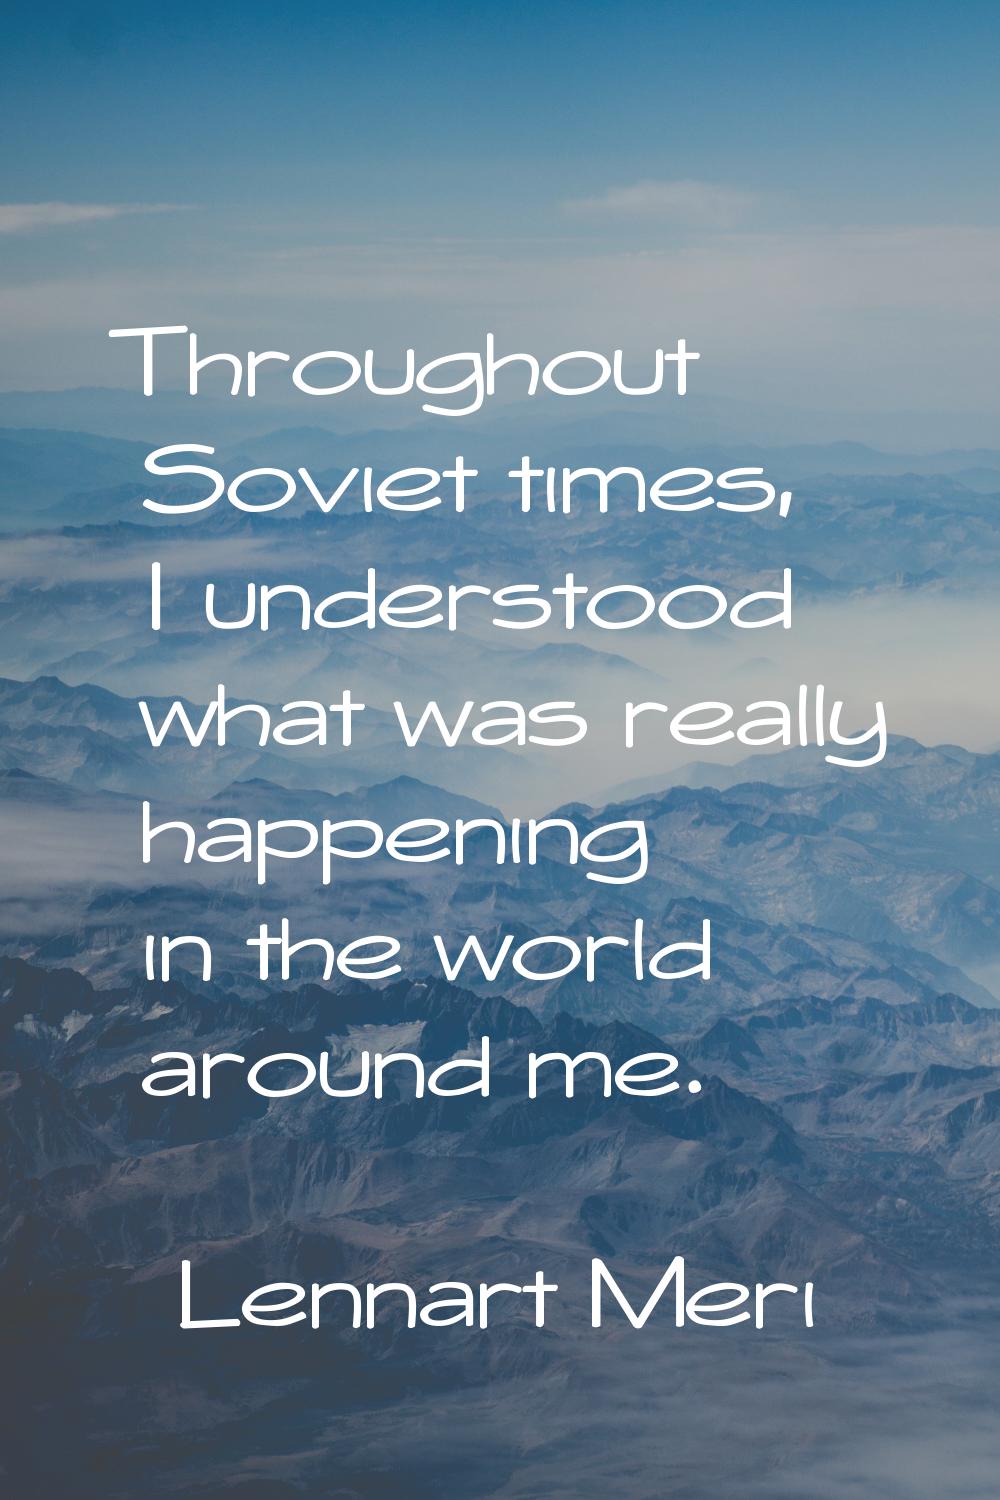 Throughout Soviet times, I understood what was really happening in the world around me.